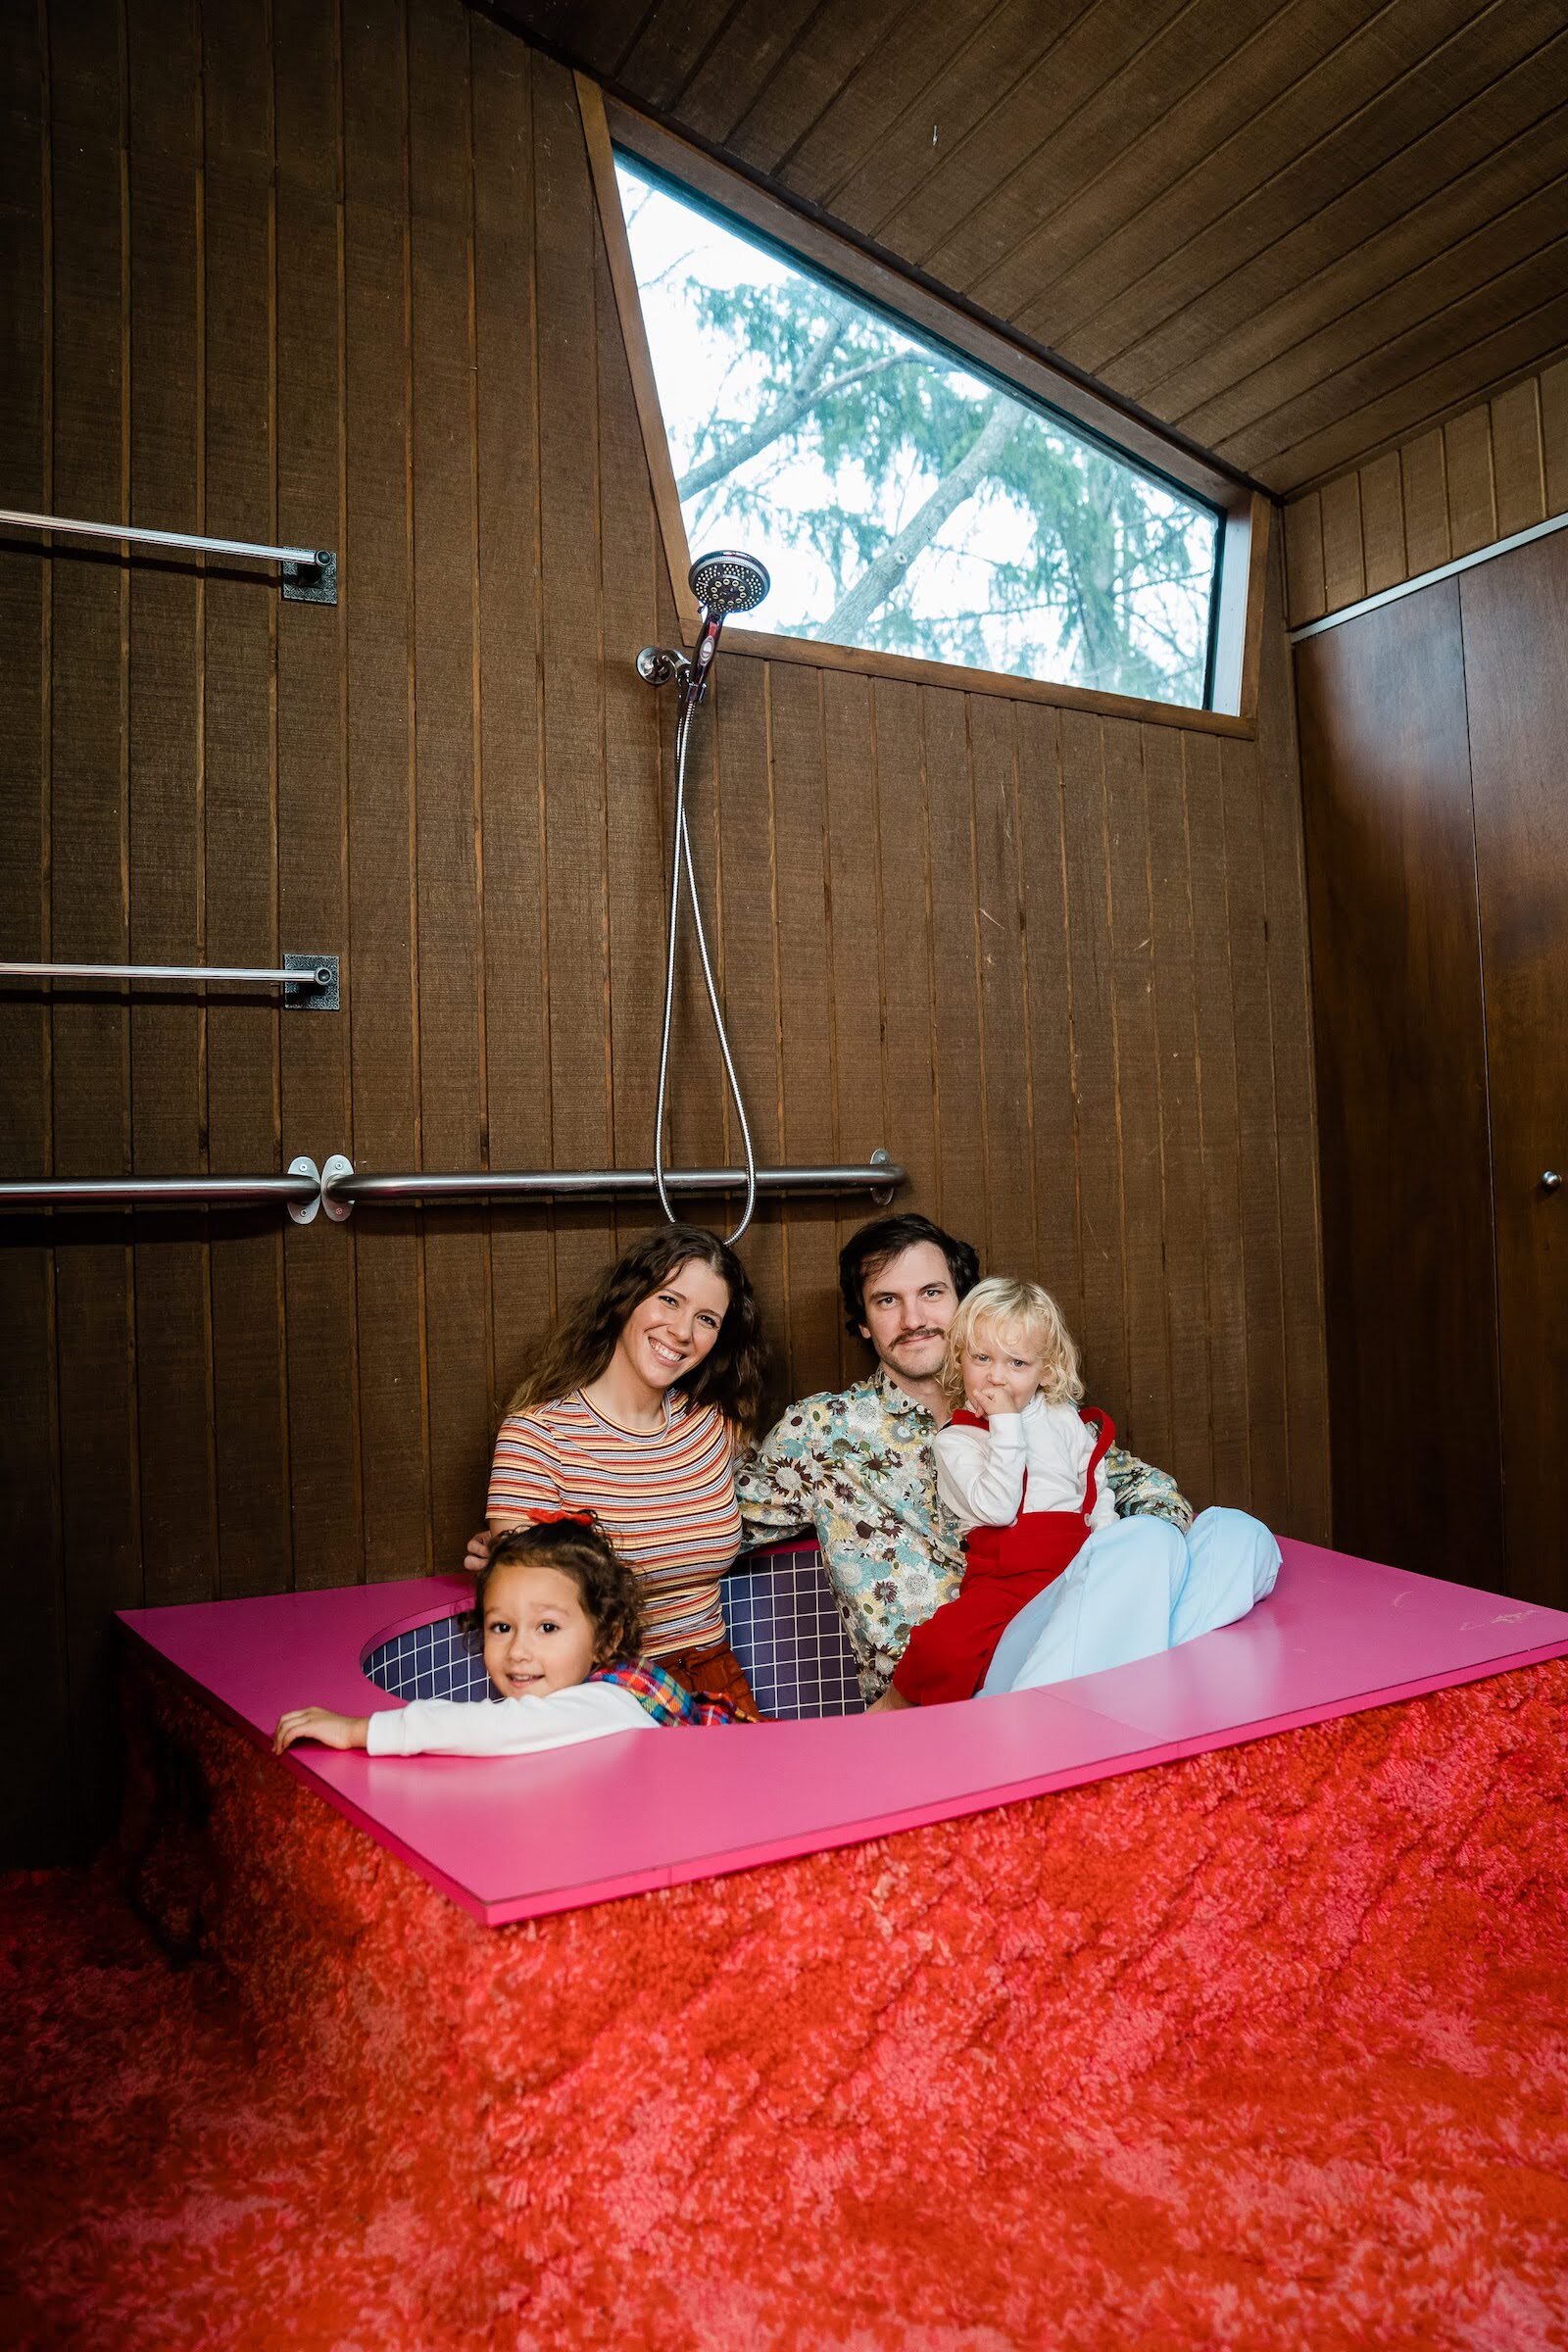 Alysha and Nate Jackson with their children in the shag-covered tub.